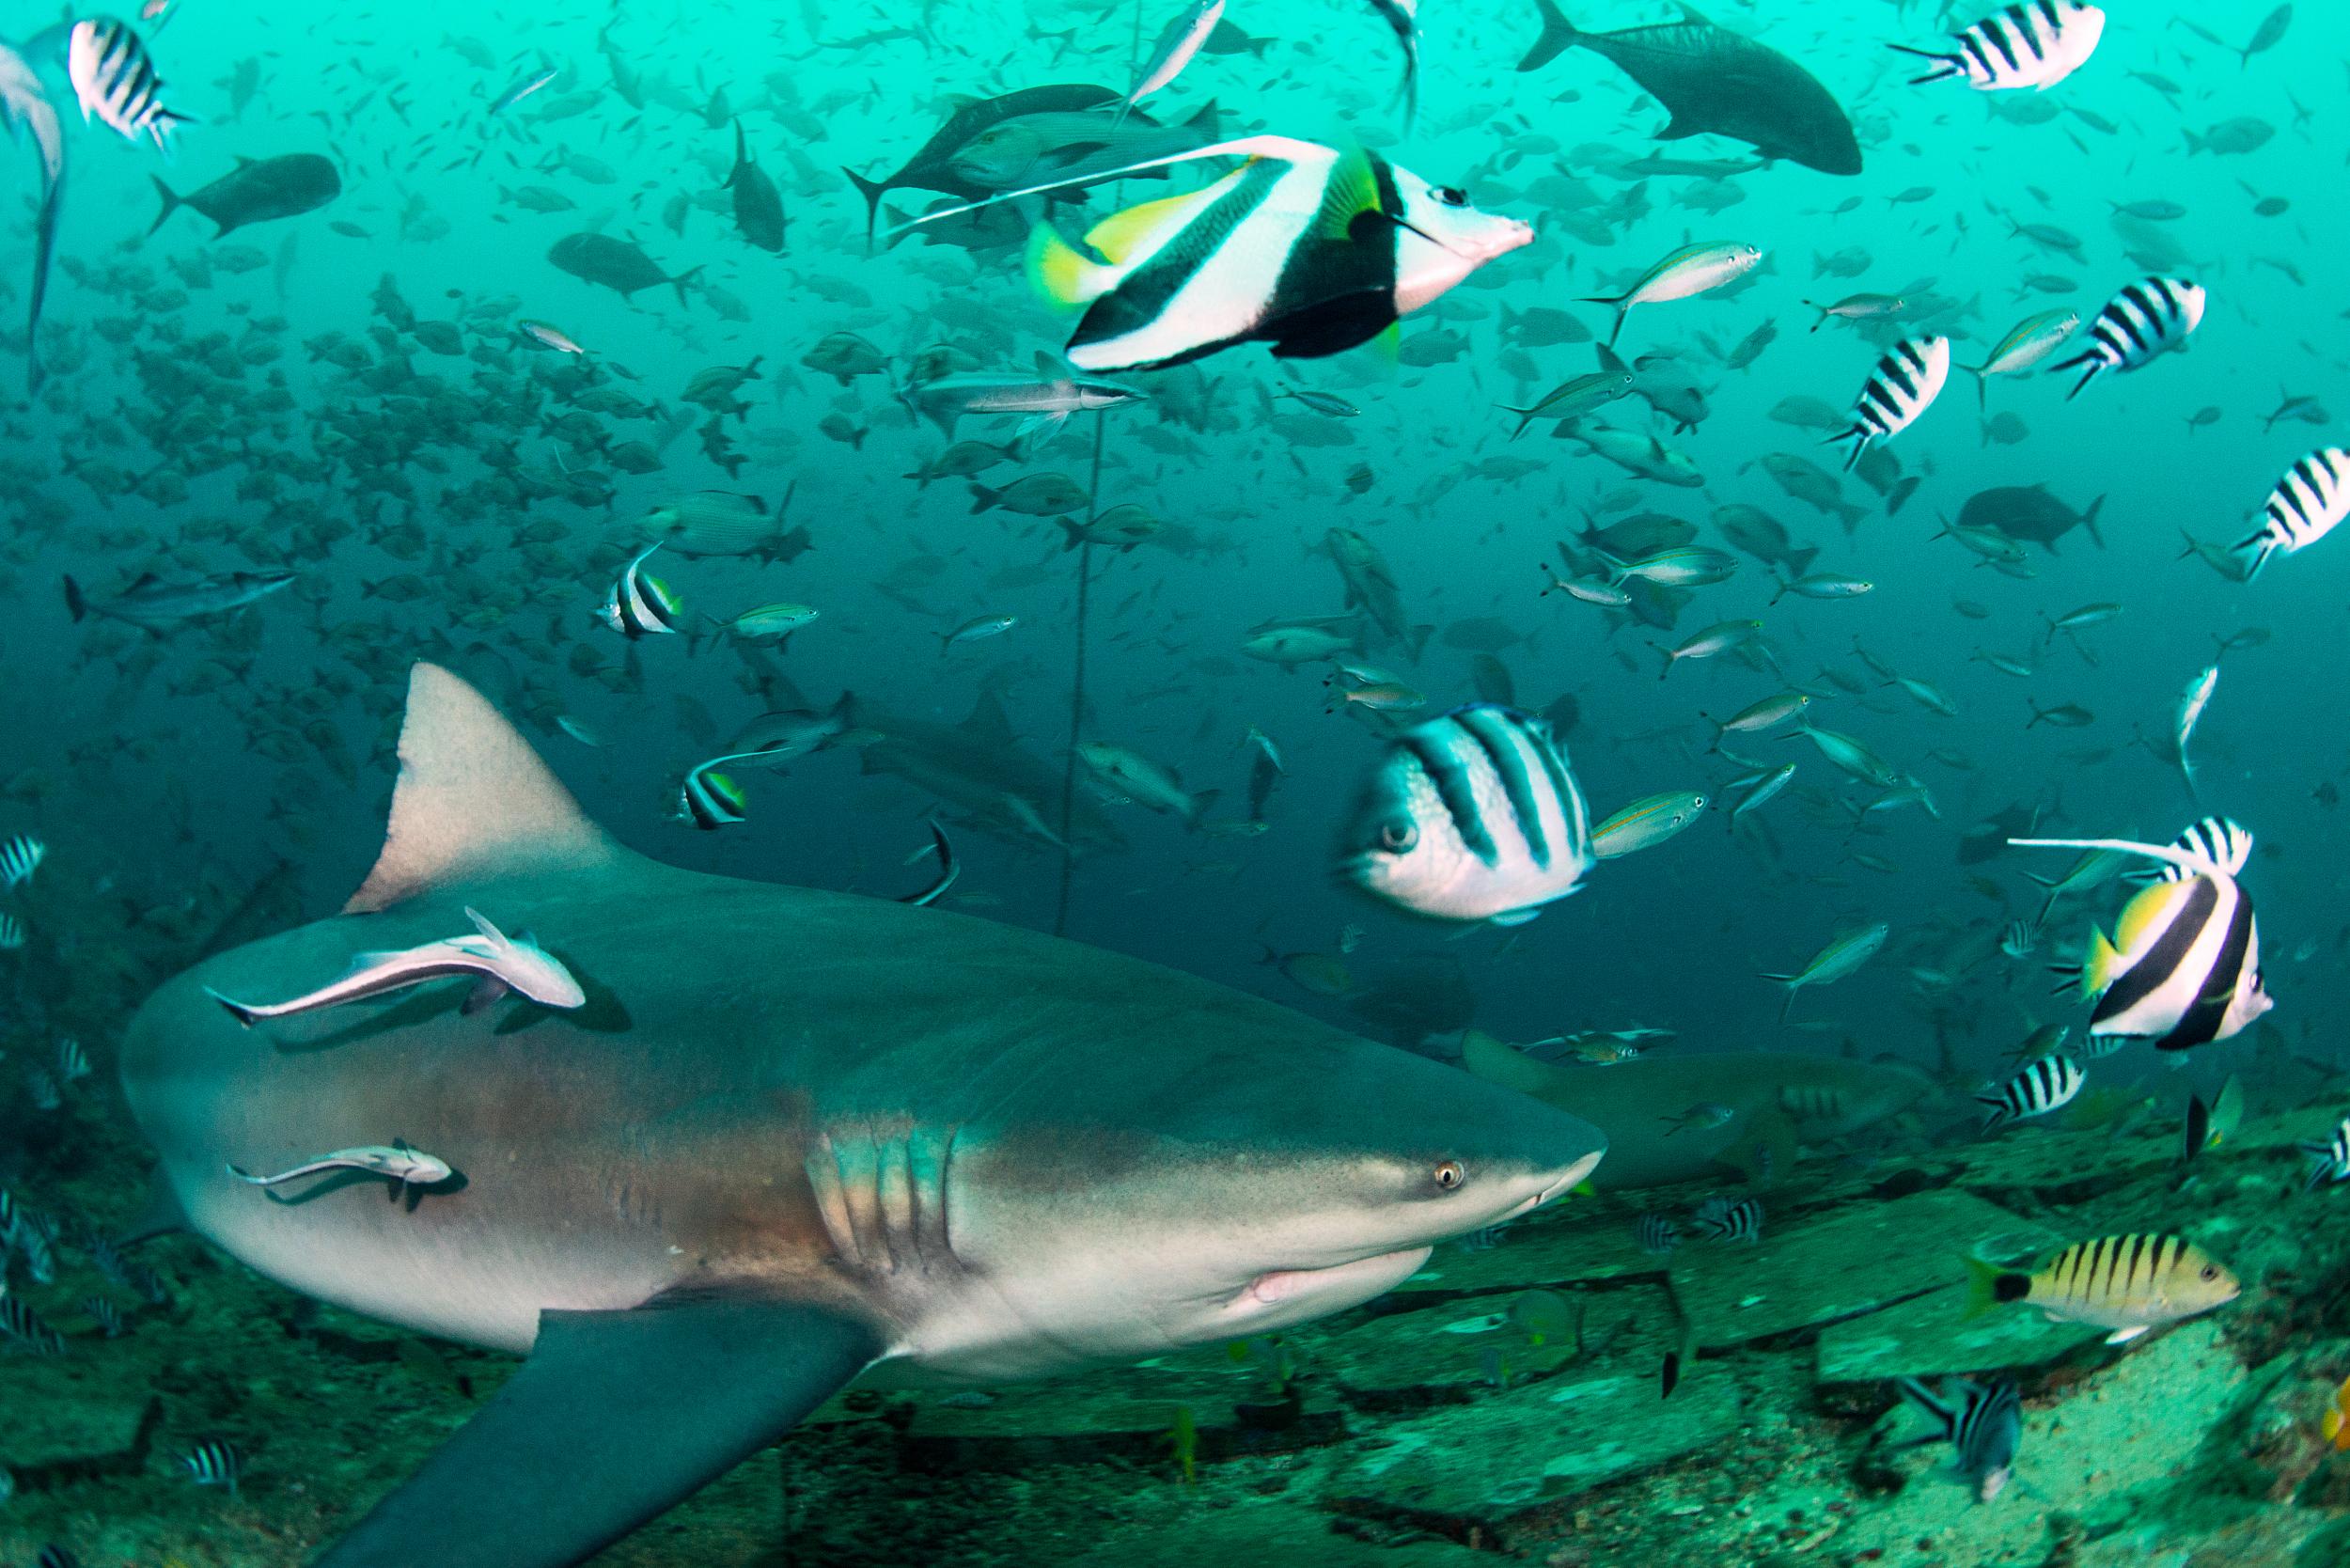 Fiji is one of the few places you can try cage-free shark diving